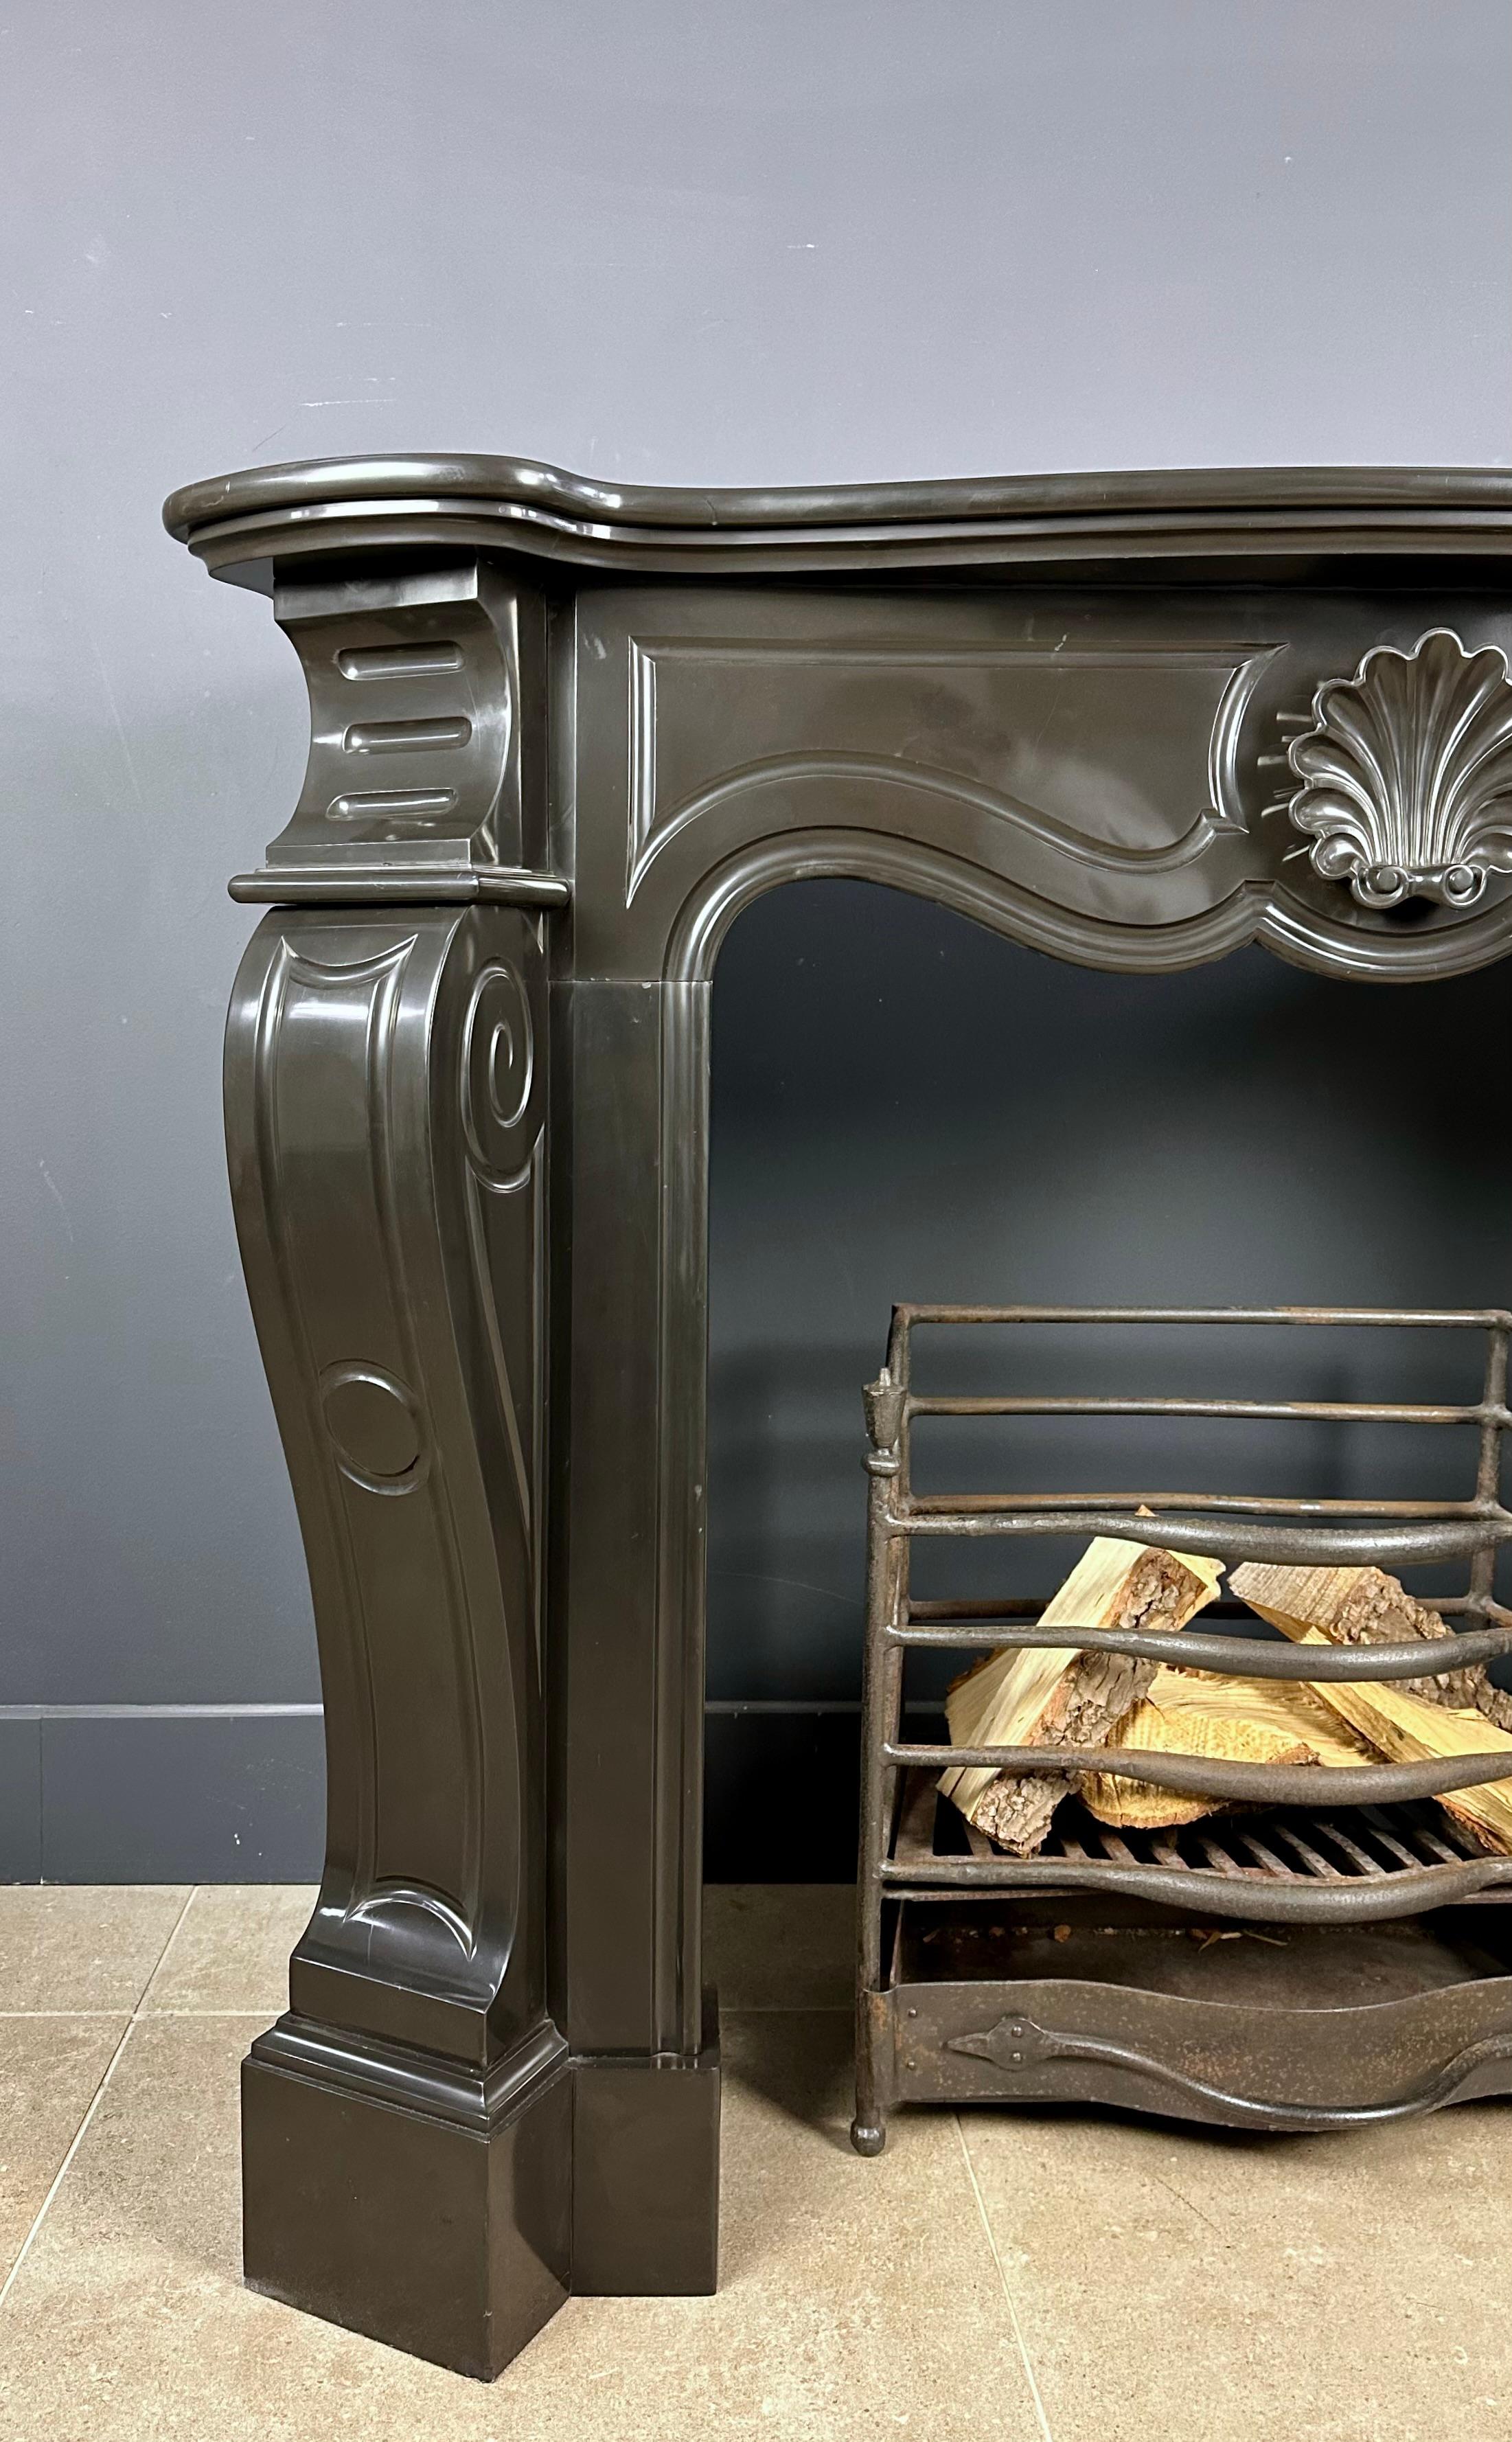 Enrich your living space with the timeless allure of our Black Antique Circular Fireplace. Restored and repolished with extreme care, this fireplace exudes an unmistakable sense of history and elegance.

This beautiful mantel is perfect for creating